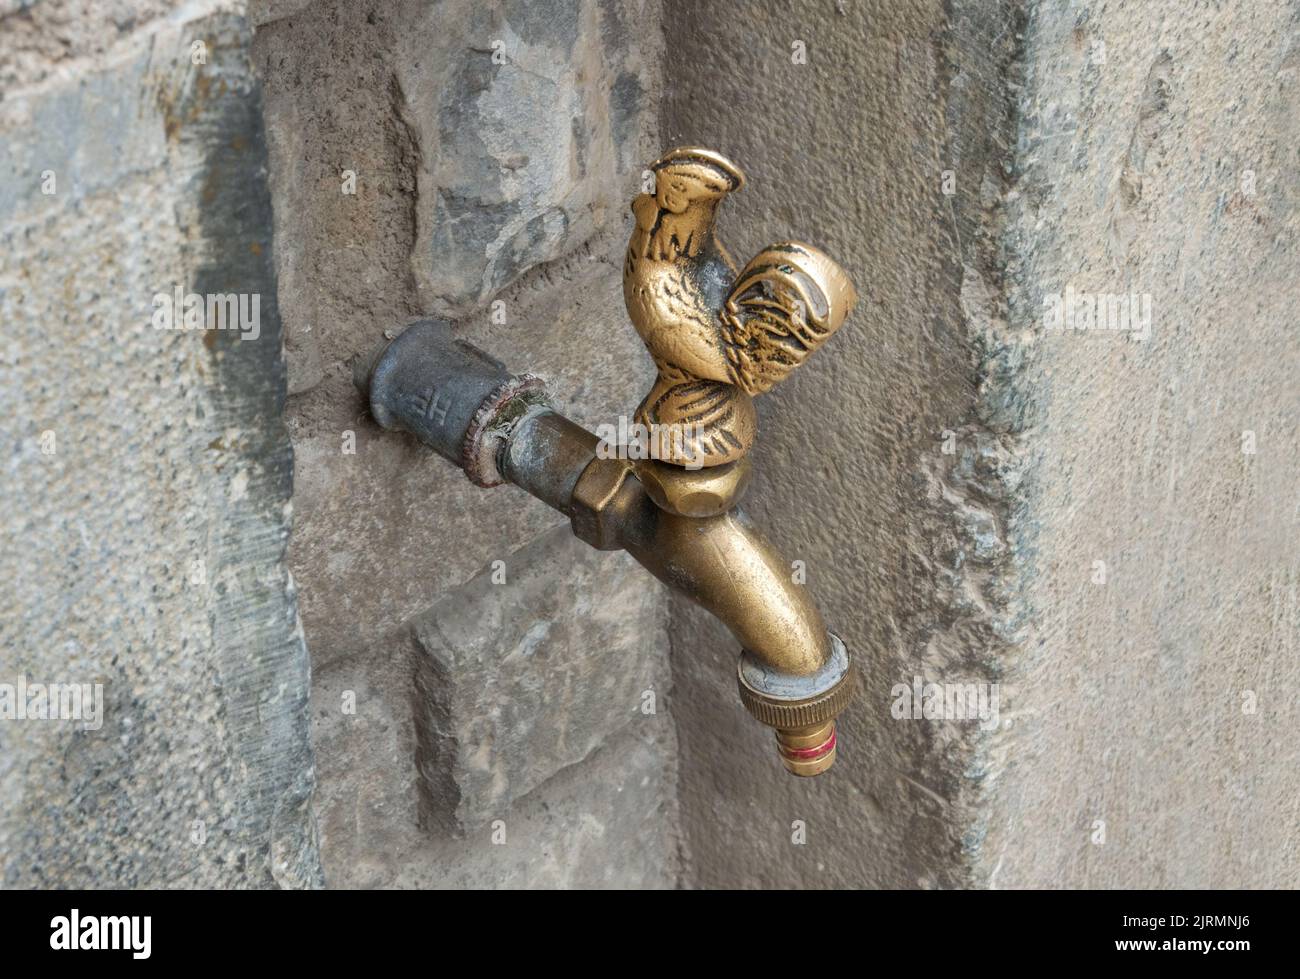 Antique brass water tap with handle in the shape of a rooster. Stock Photo